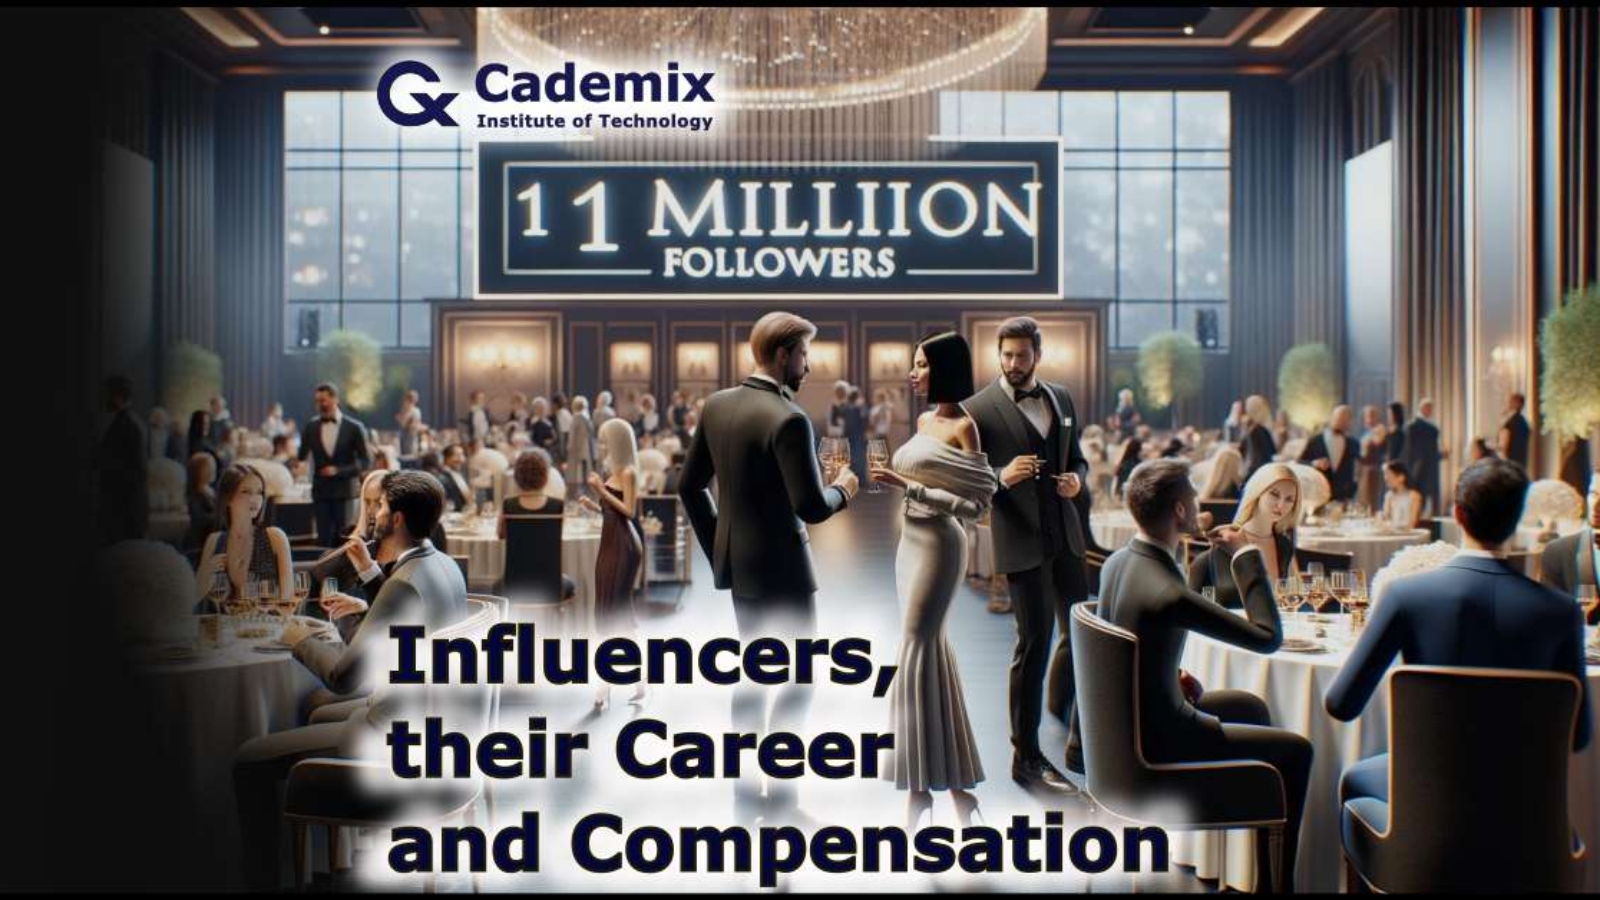 A high-profile social media influencer at a luxury event, engaging with guests in a setting that emphasizes their status as an influencer with over 1 million followers. By Samareh Ghaem Maghami, Cademix Magazine